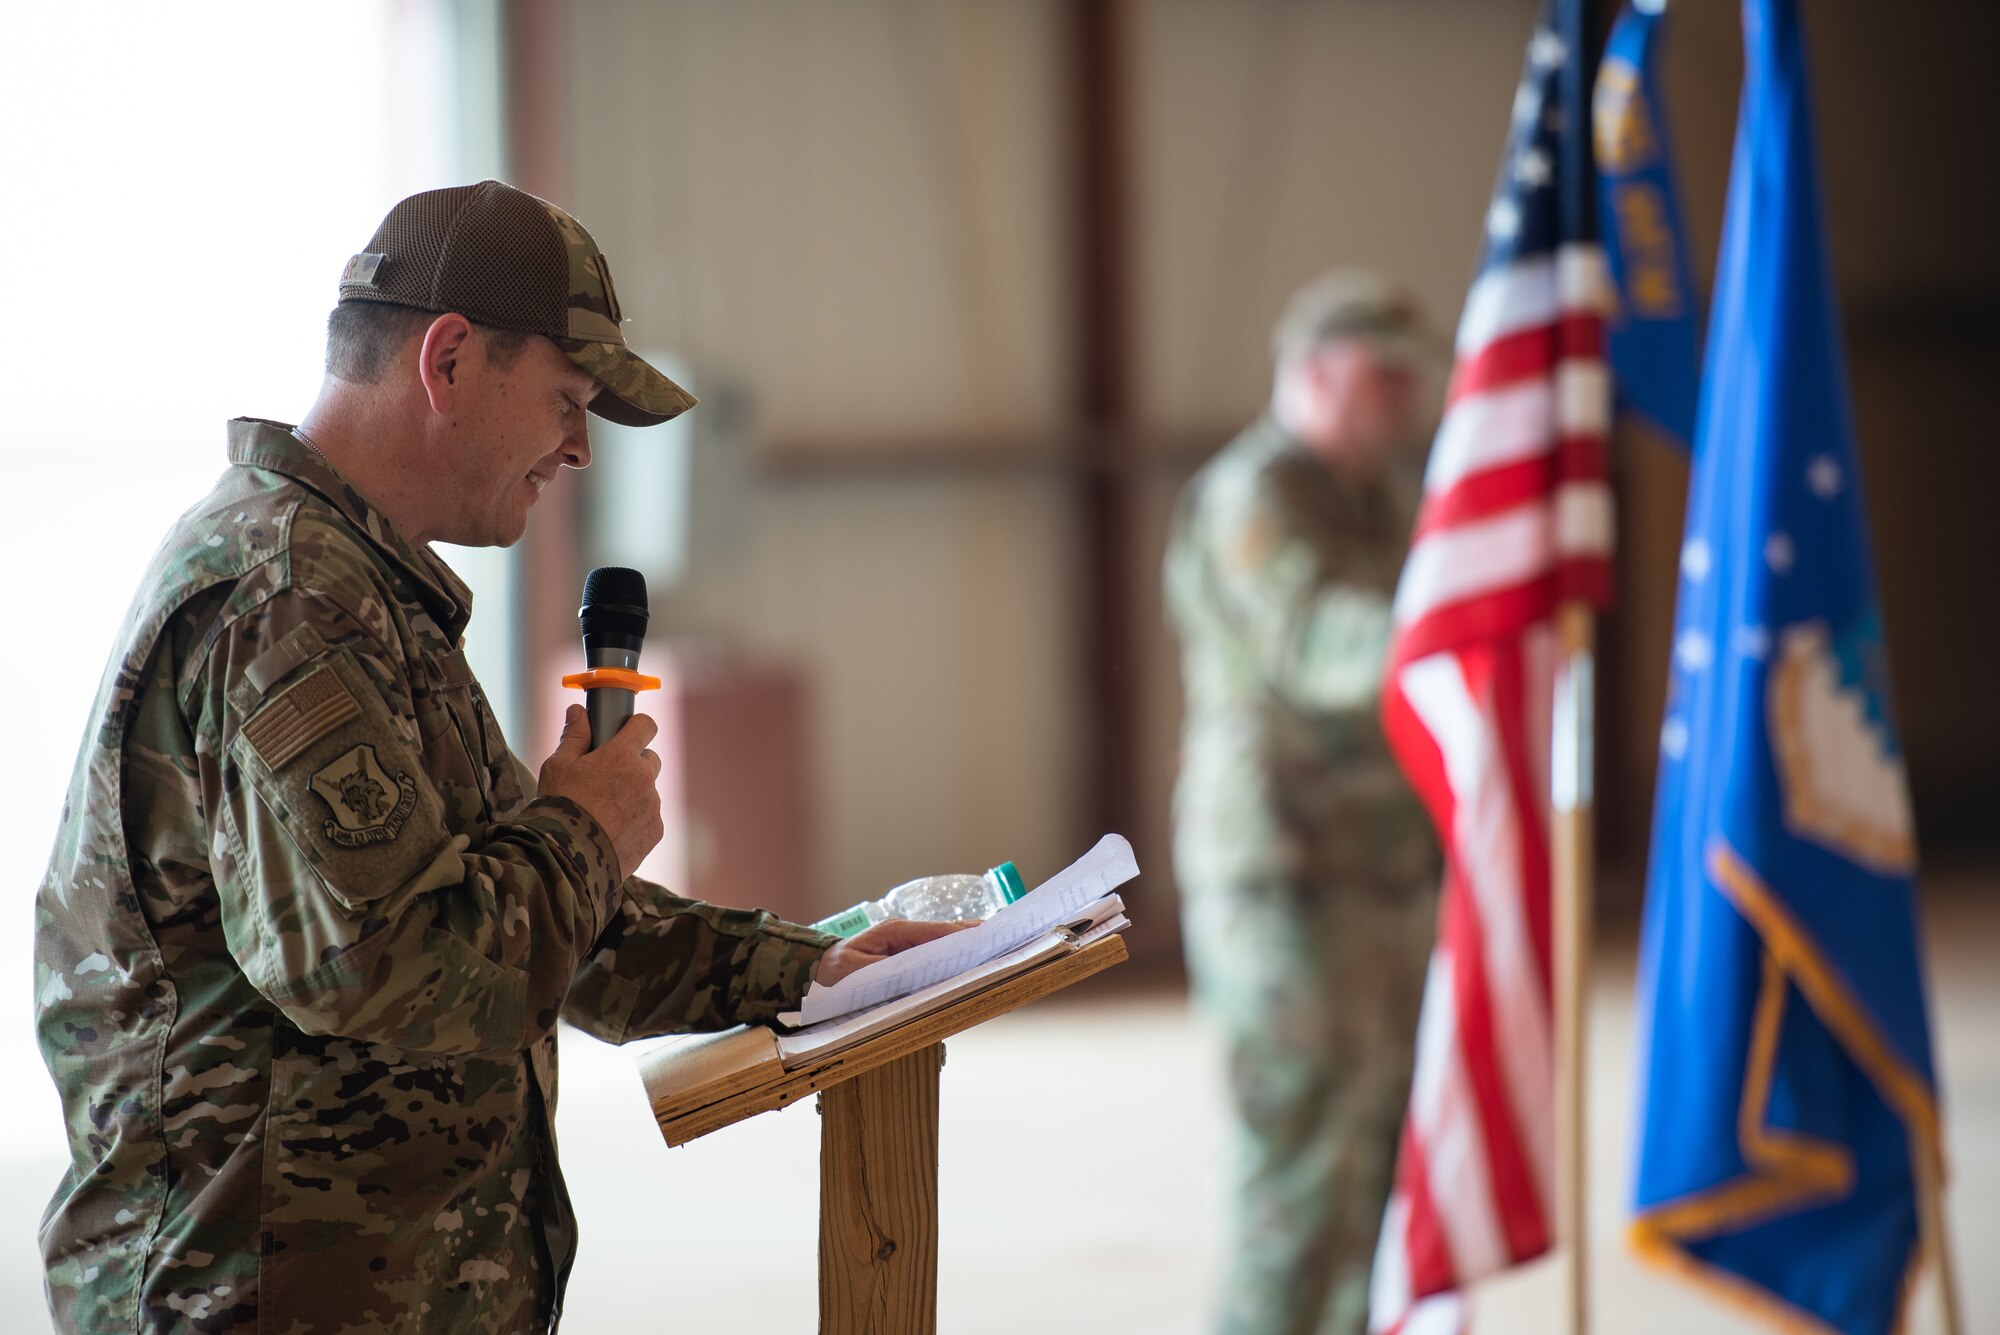 U.S. Air Force Col. Steven P. Bording, 409th Air Expeditionary Group commander, gives his first speech to the group during the change of command ceremony at Air Base 201, Niger, June 28, 2019. After Creer’s remarks, he gave his first salute to the group. (U.S. Air Force photo by Staff Sgt. Devin Boyer)